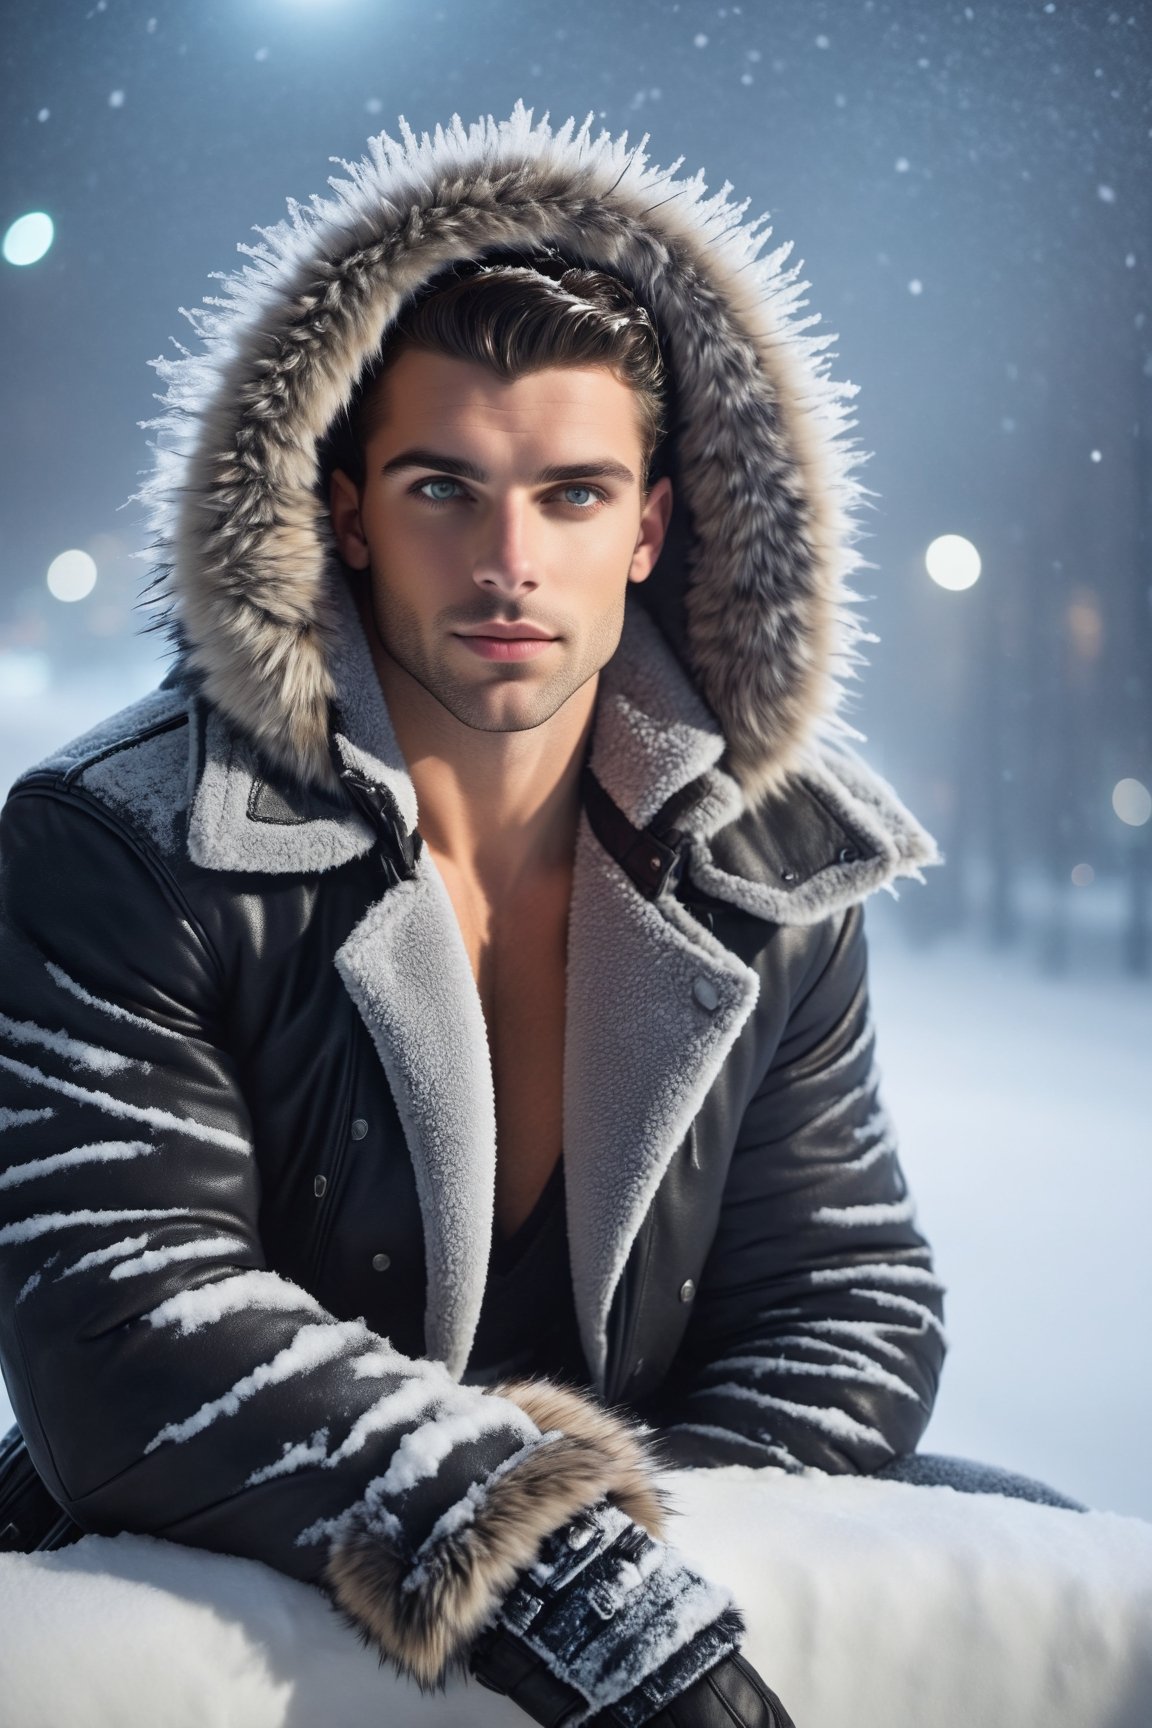 A 27-year-old man with a toned,  athletic physique sits in central London surrounded by snow. The snow creates a magical atmosphere,  adding to the Christmas tale. He appears Jewish with a Caucasian nose. The man has shoulder-length black hair,  green eyes,  and a neat hairstyle with bangs on his face. The leather jacket is a brand-name item with a loose silhouette and long fur lining. It features a large hood with fur trim. The jeans are and ripped. The eyes are very detailed and green. The photography style is fantasy-inspired. 
Perfect eyes, ral-chrcrts, DonMSn0wM4g1cXL,,,
,,Link Girl
,DonMSn0wM4g1cXL,Movie Still